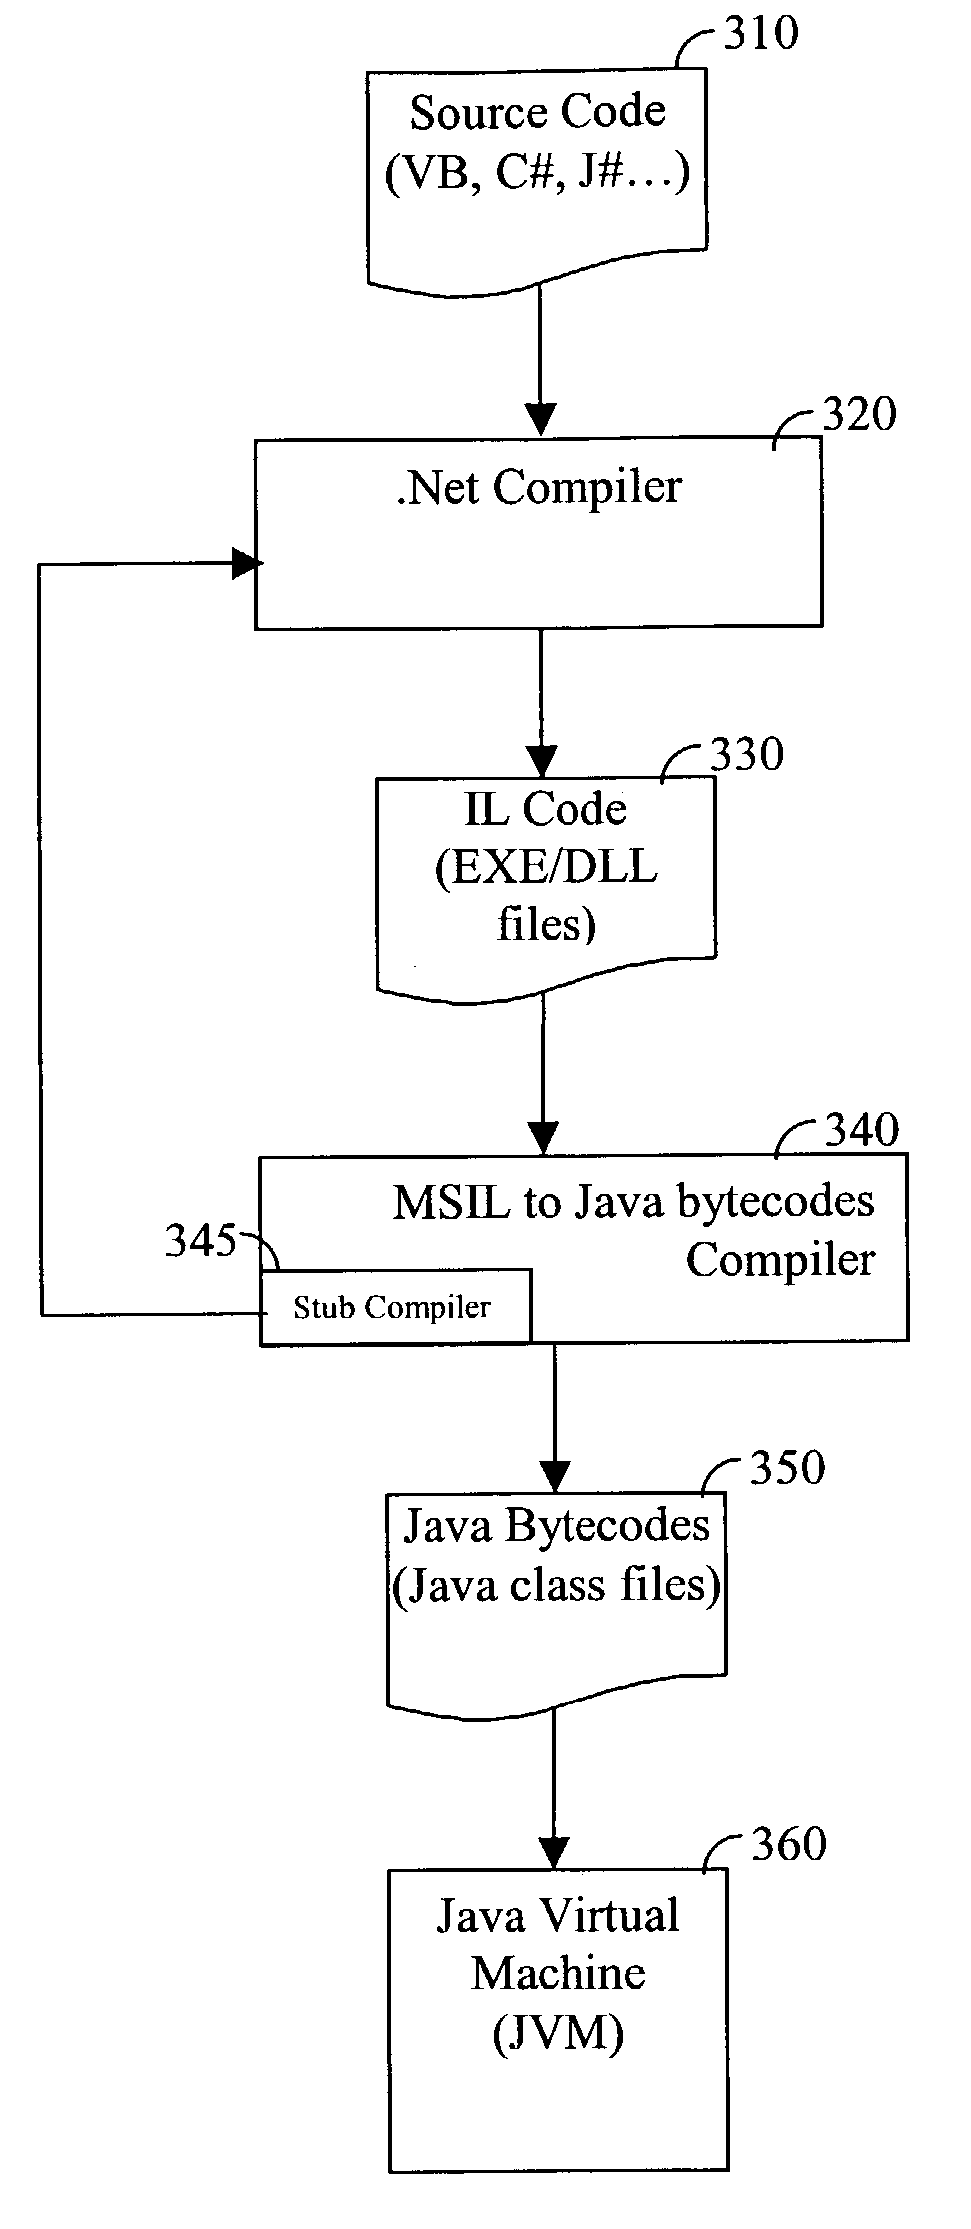 Compiler and software product for compiling intermediate language bytecodes into Java bytecodes